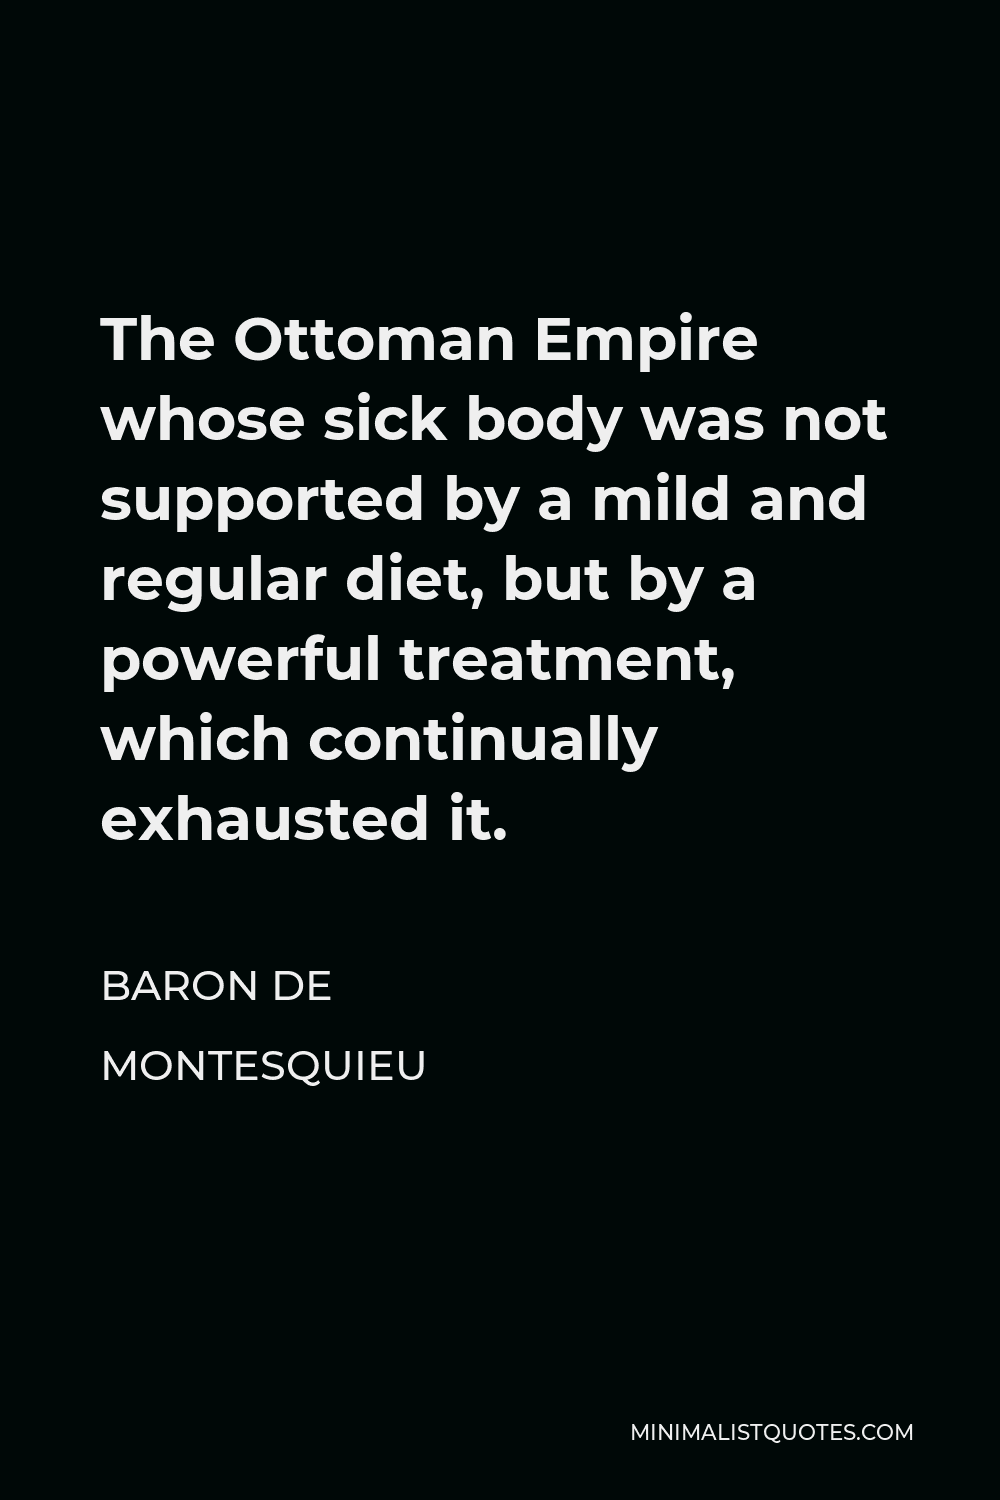 Baron de Montesquieu Quote - The Ottoman Empire whose sick body was not supported by a mild and regular diet, but by a powerful treatment, which continually exhausted it.